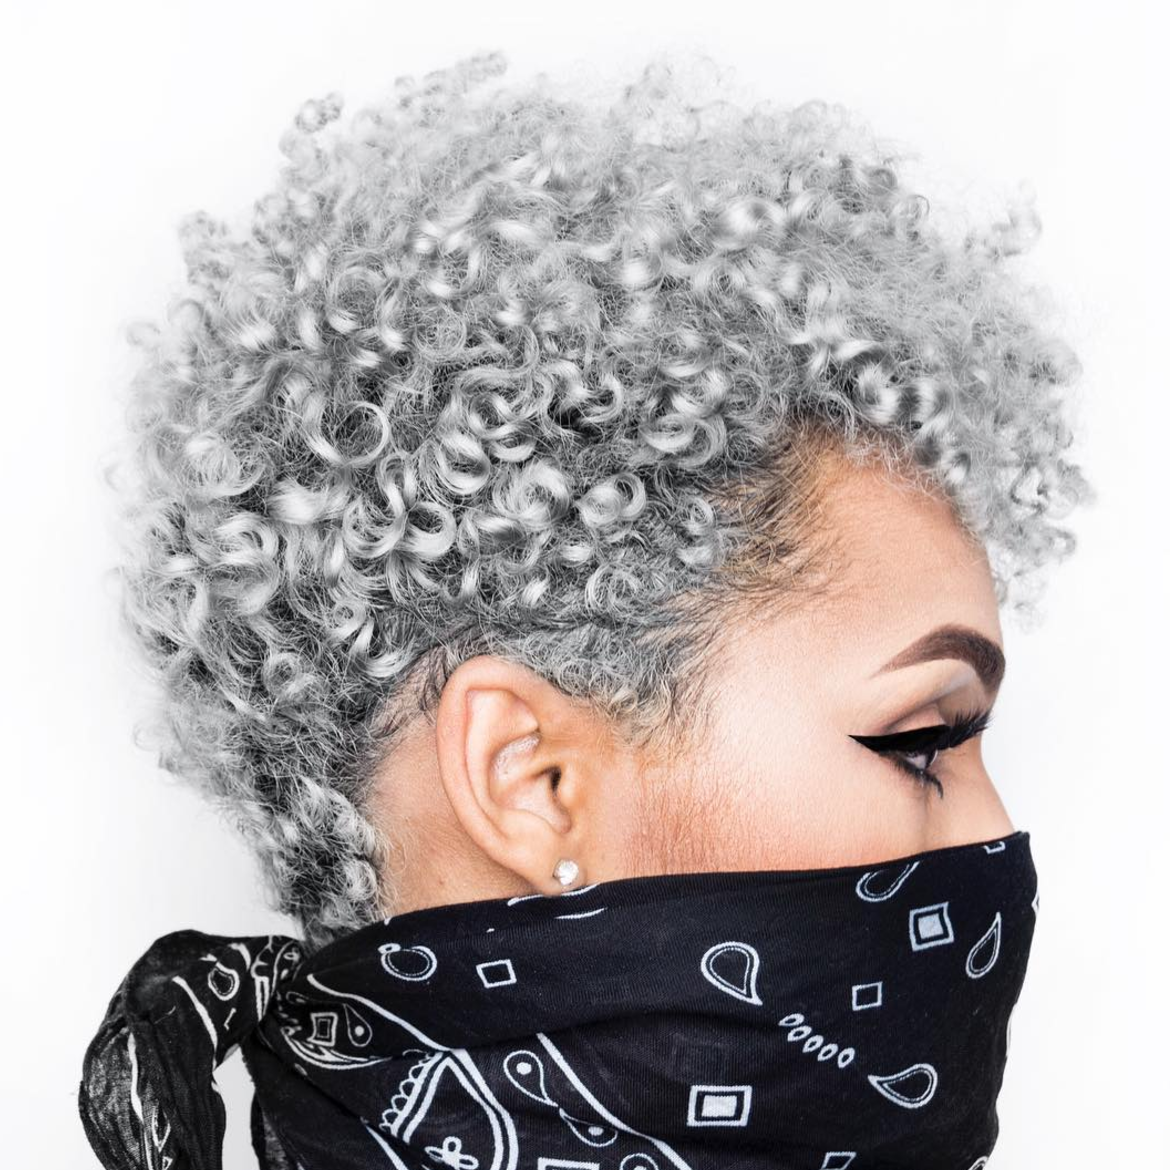 Prepare To Be Obsessed With These Short Natural Hairstyles
